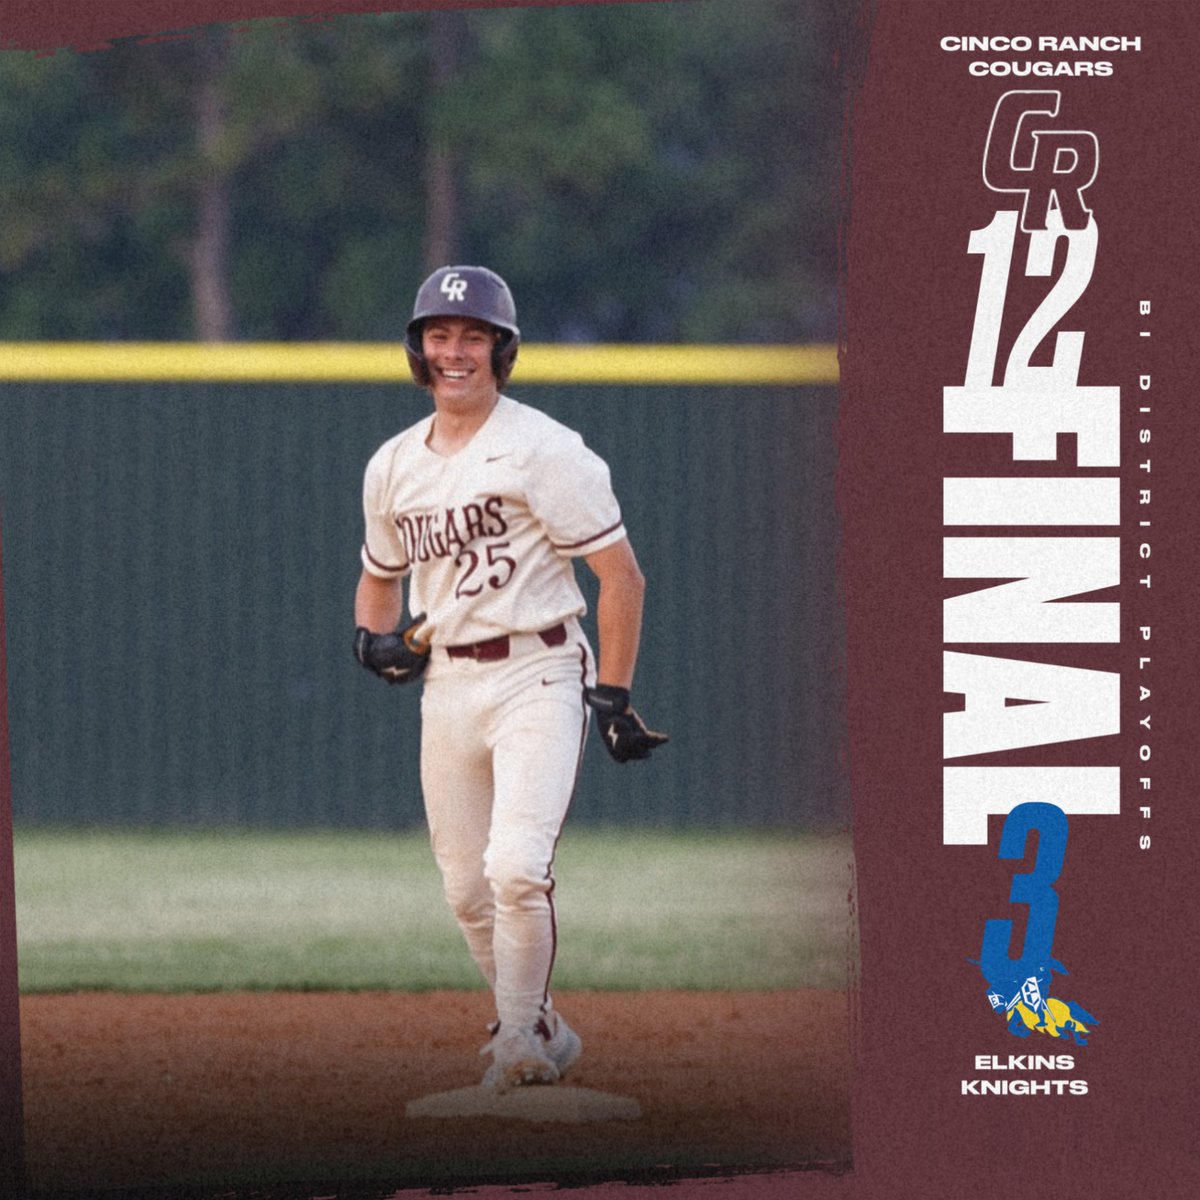 Cinco Ranch gets the bats hot early and doesn’t look back defeating Elkins 12-3 to advance to the area round of the playoffs.